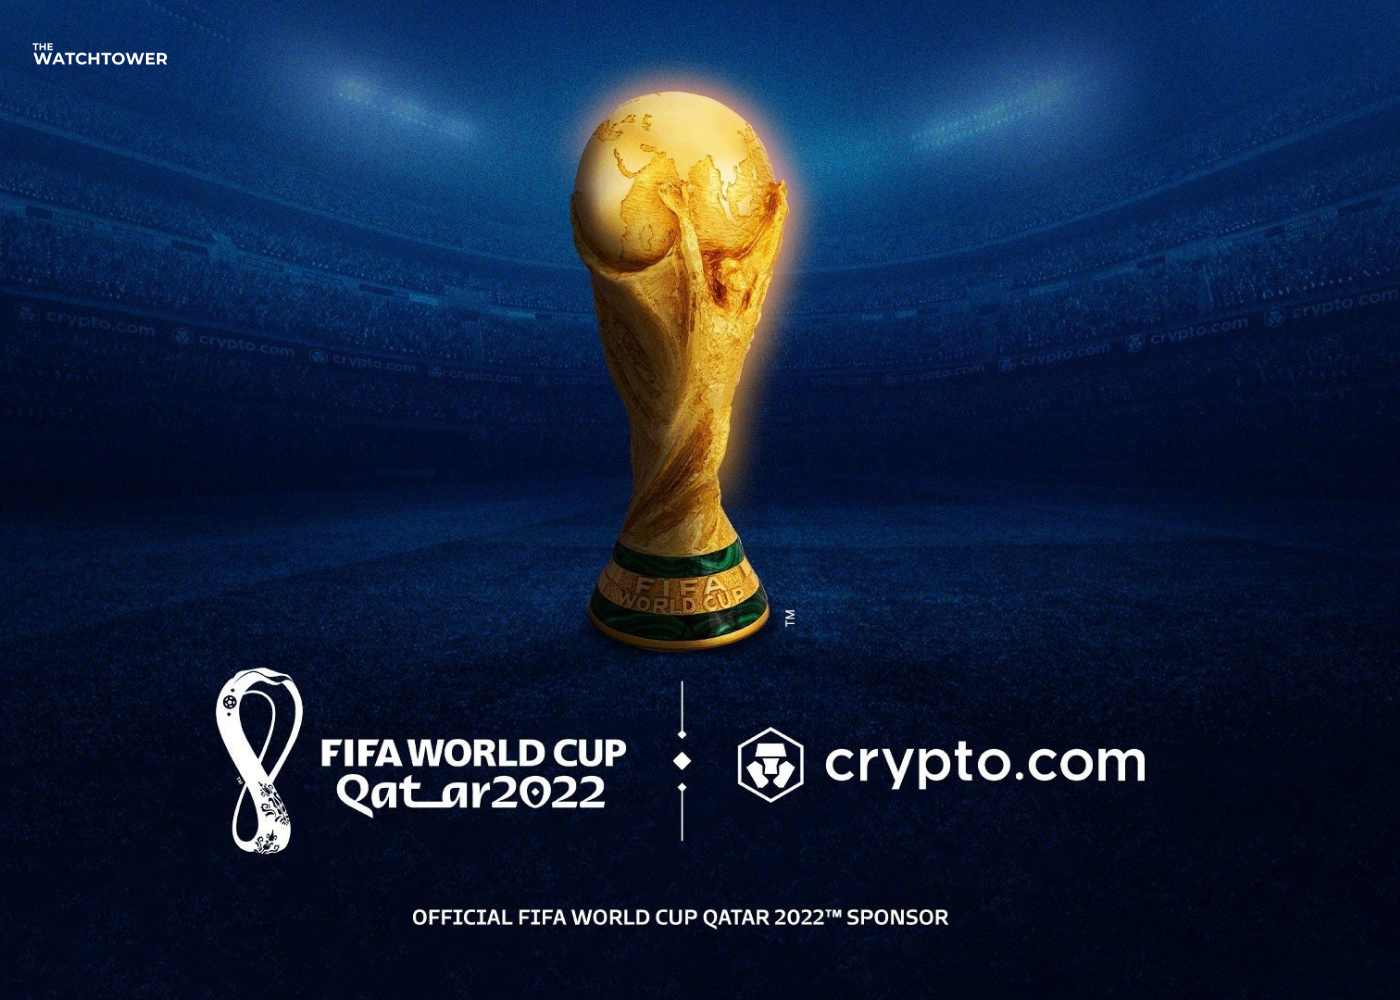 What Is the Connection Between Crypto And the 2022 Qatar World Cup?